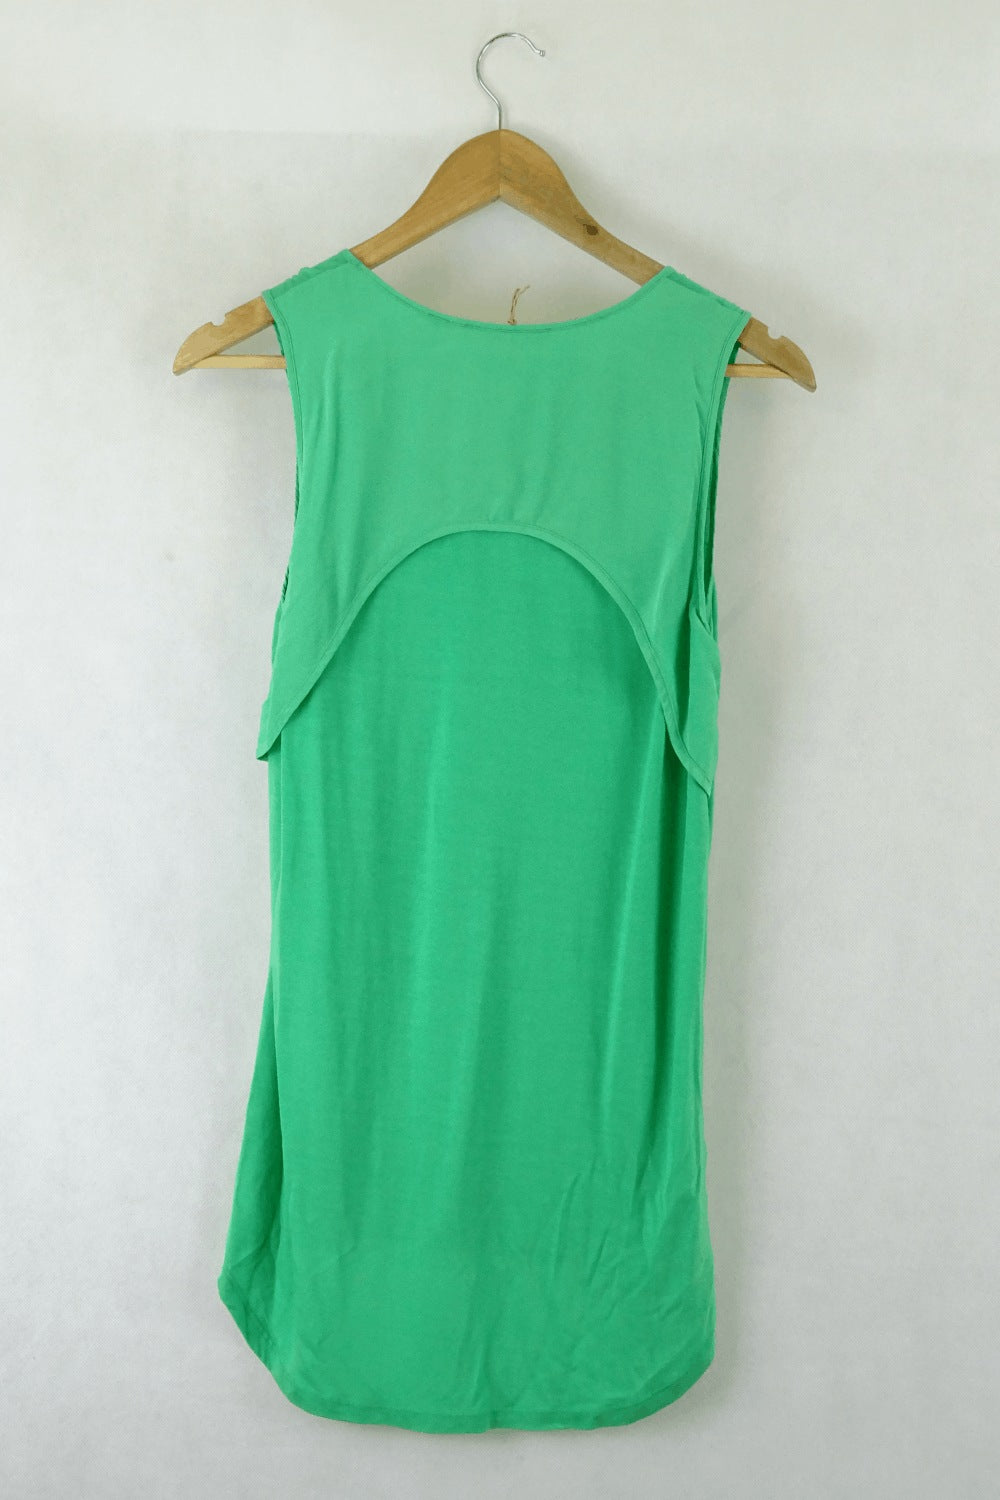 Country Road Green Top S